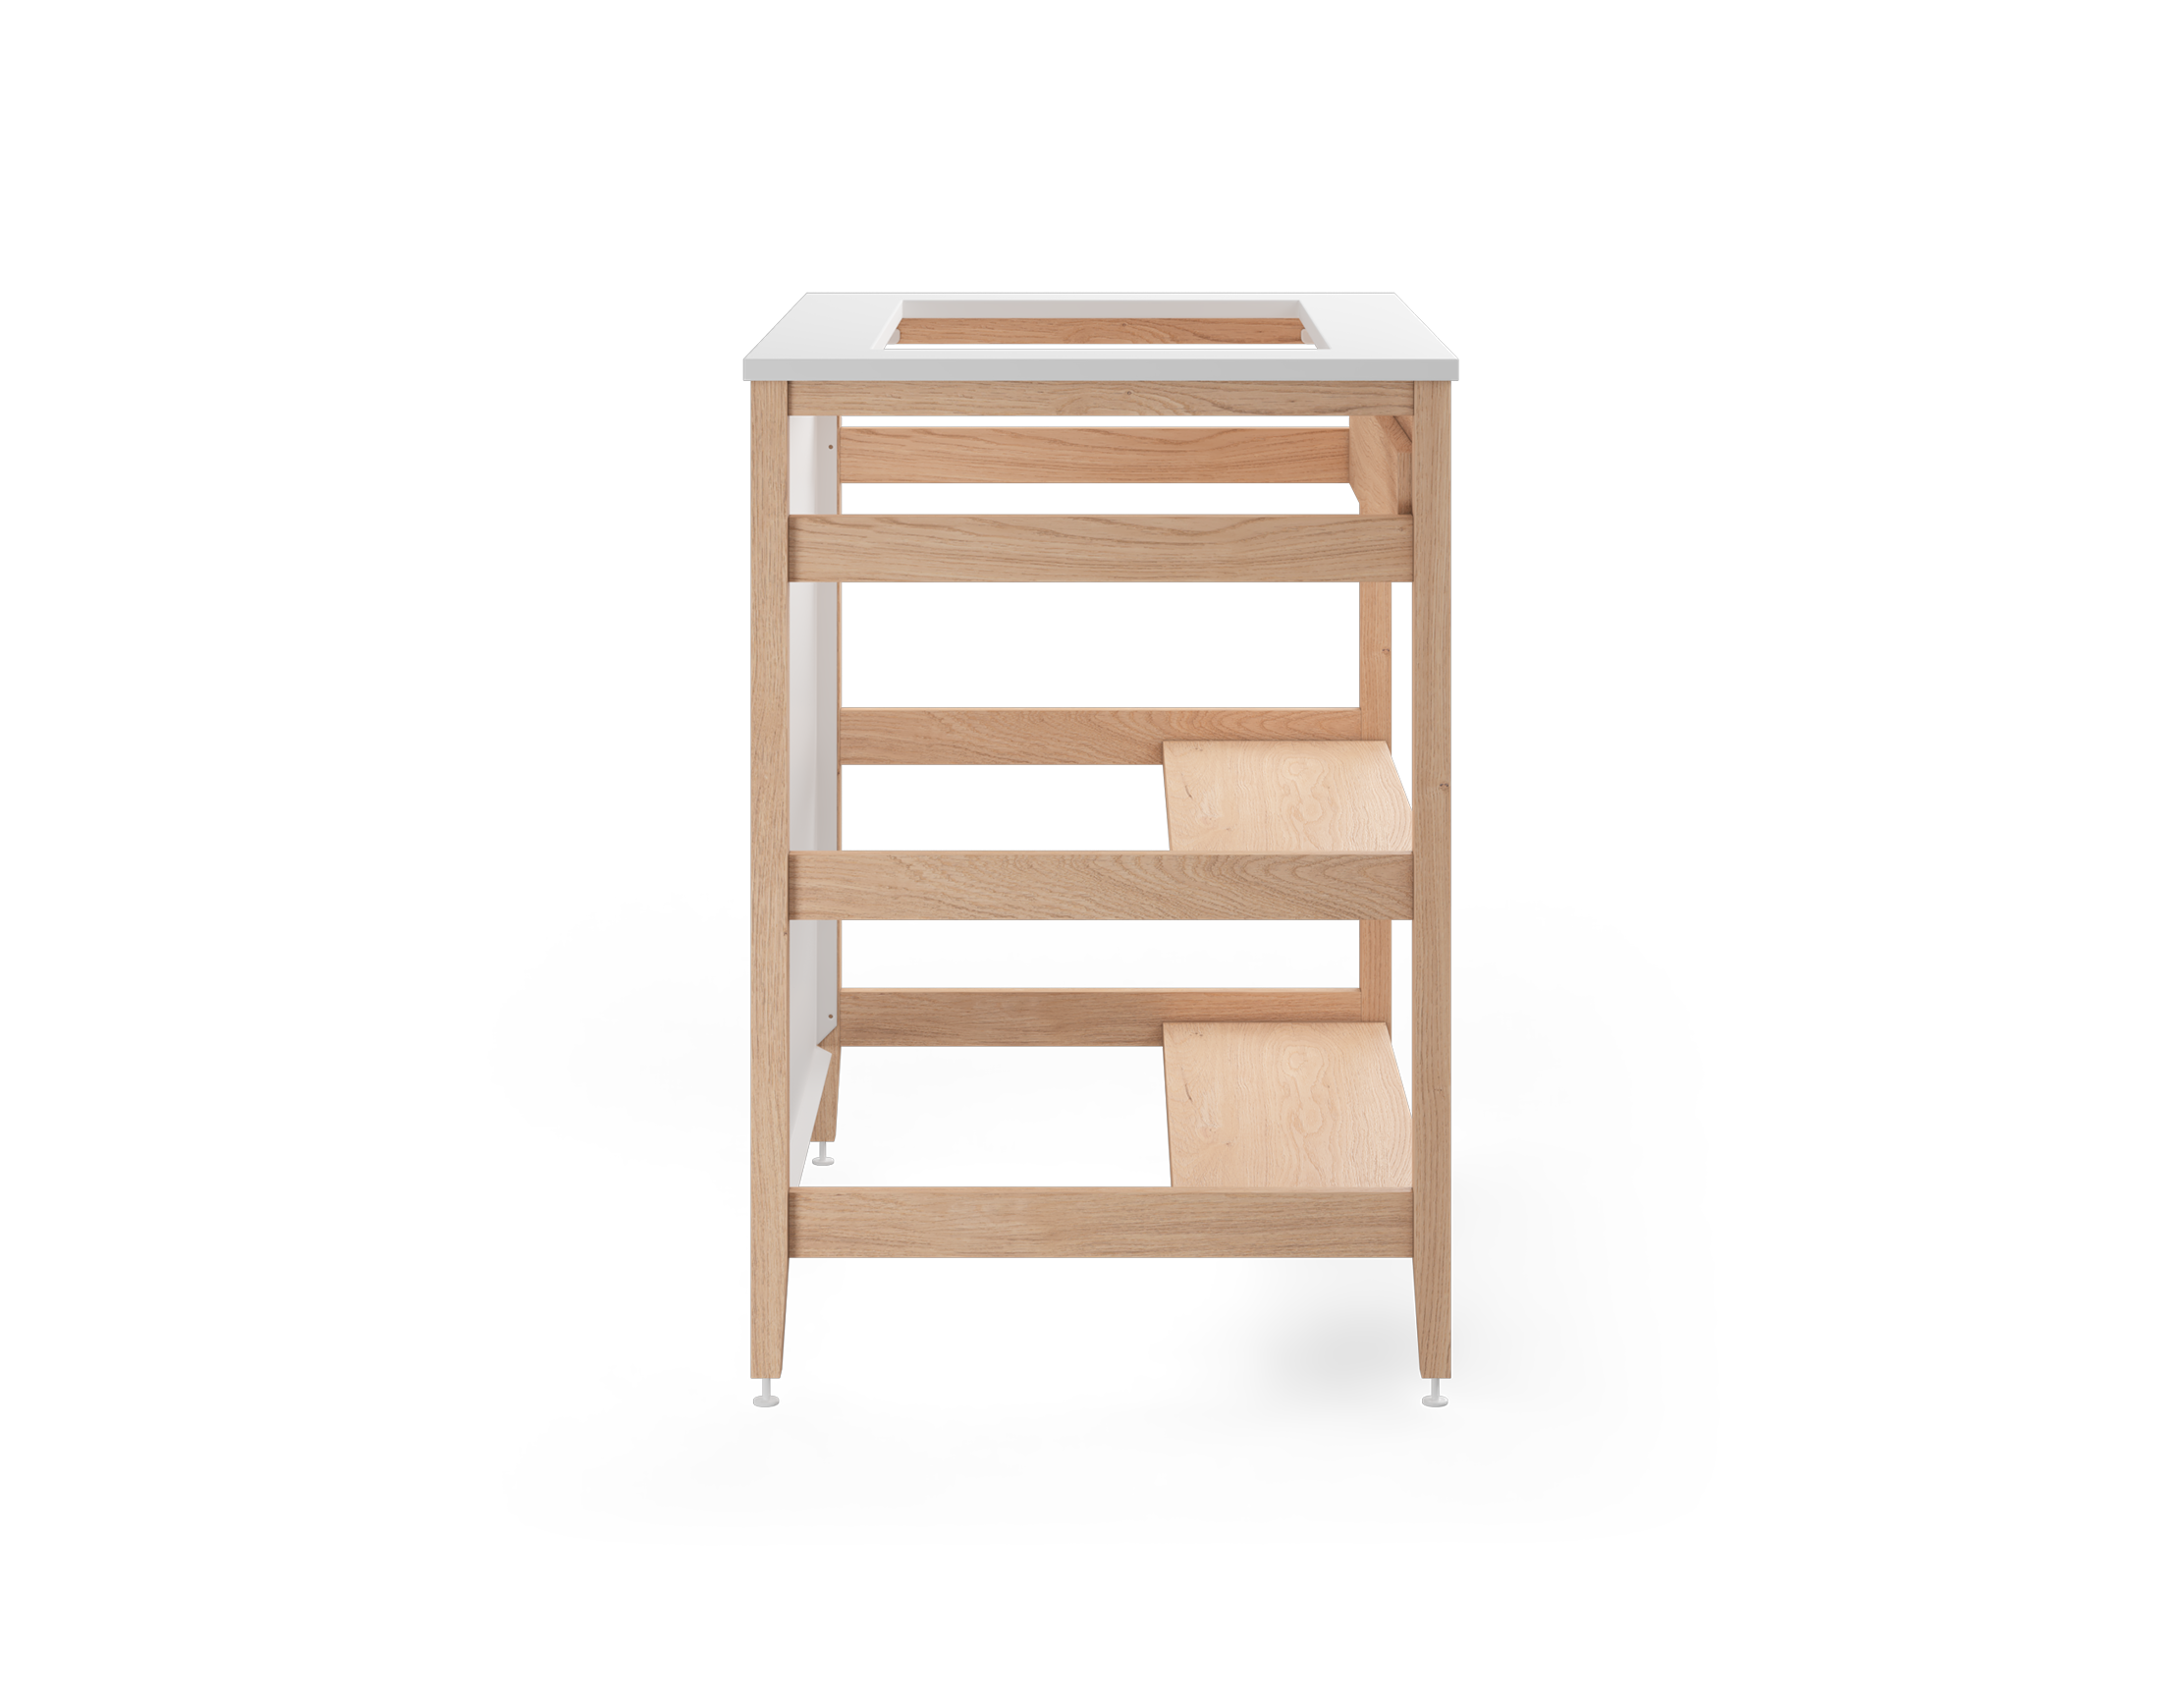 Coquo modular sink cabinet with tall metal back + Front + 2 half shelves in natural oak.
